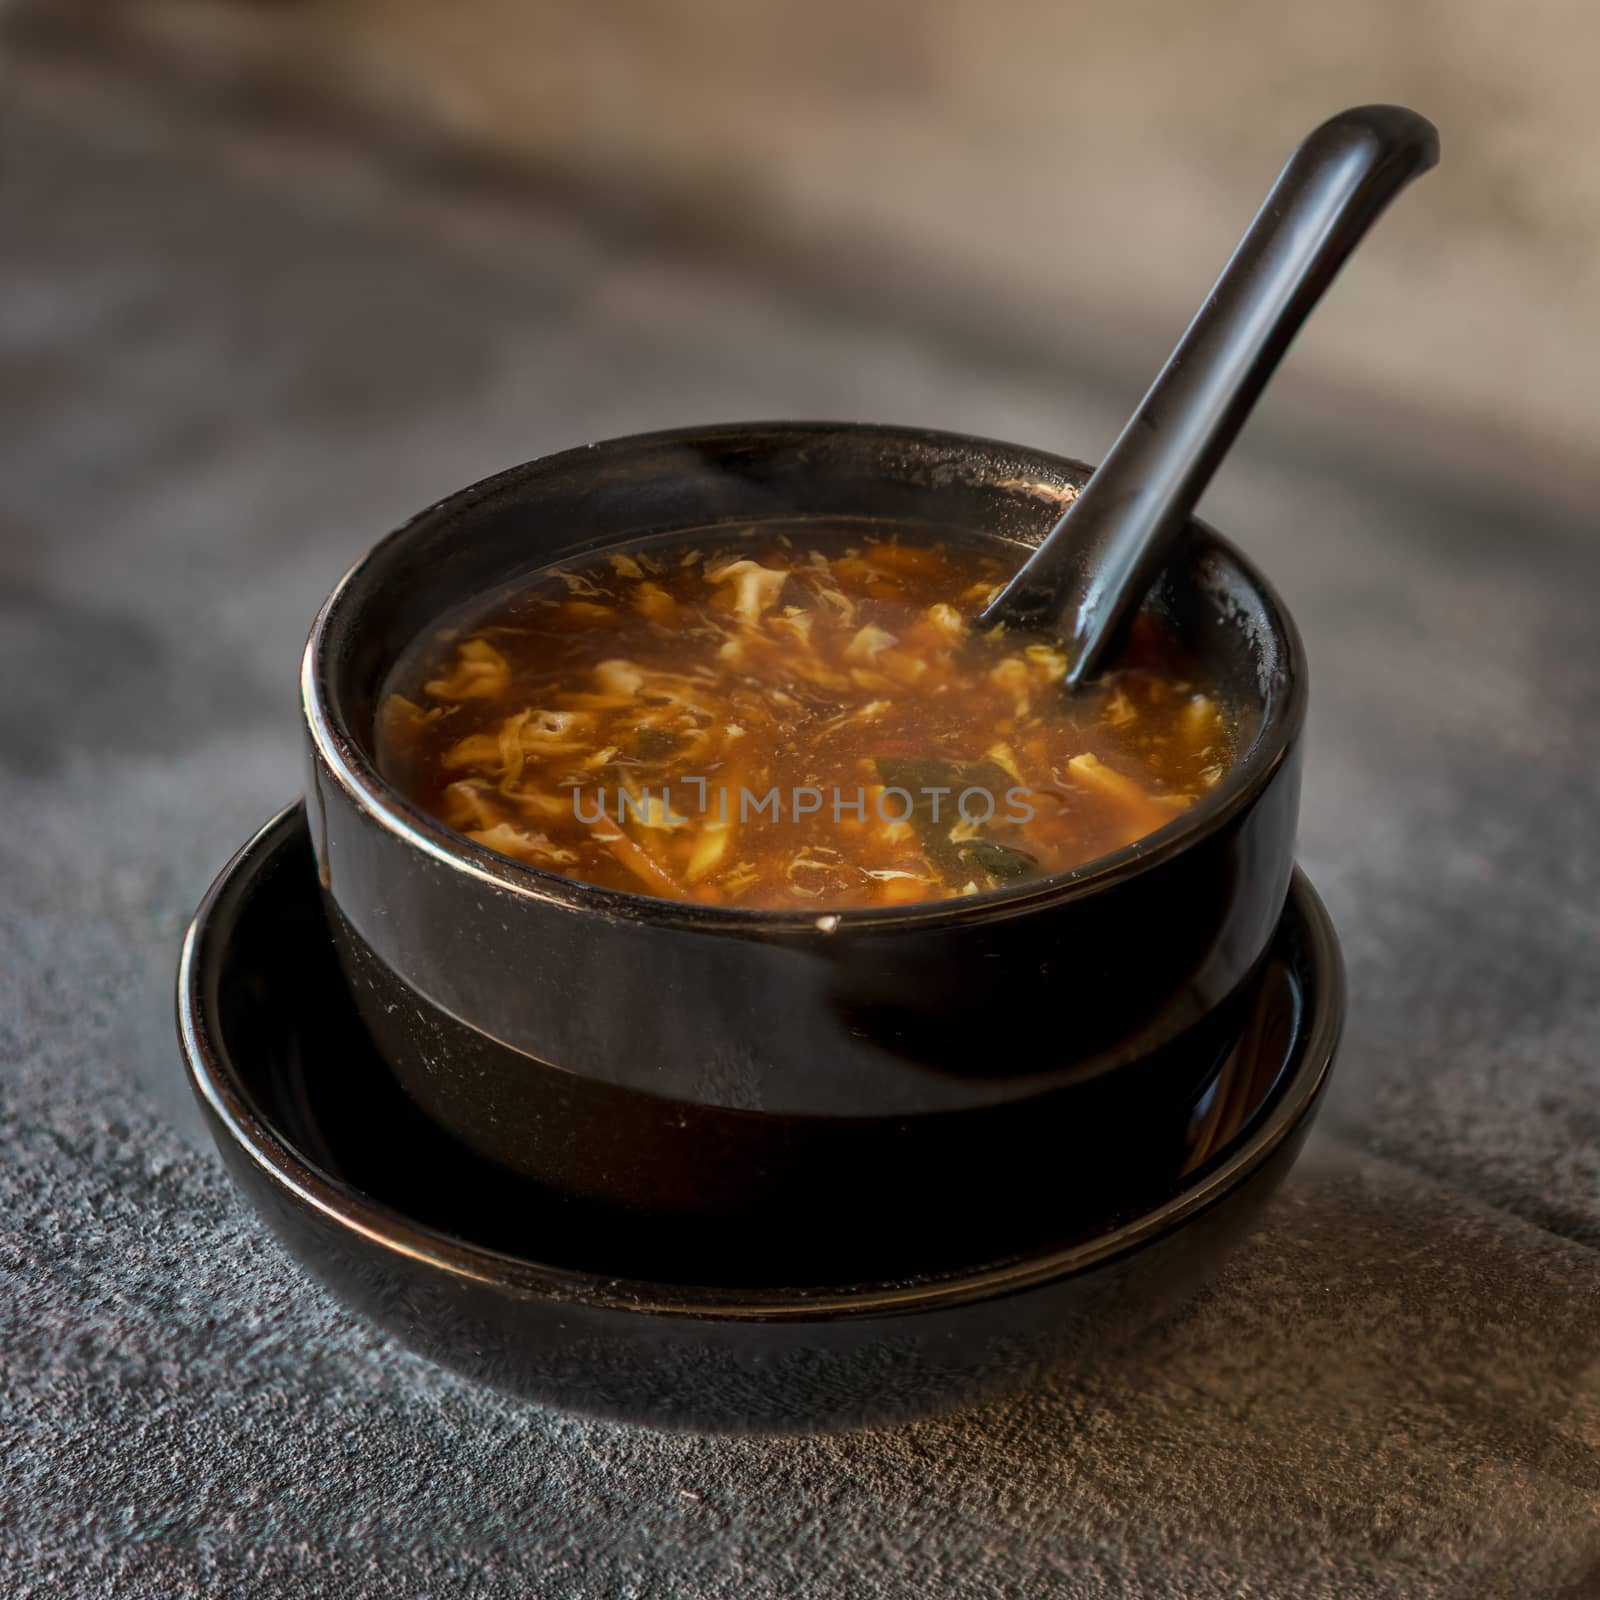 Sour soup on black iron plate on grey stone slate background. side view,close up.